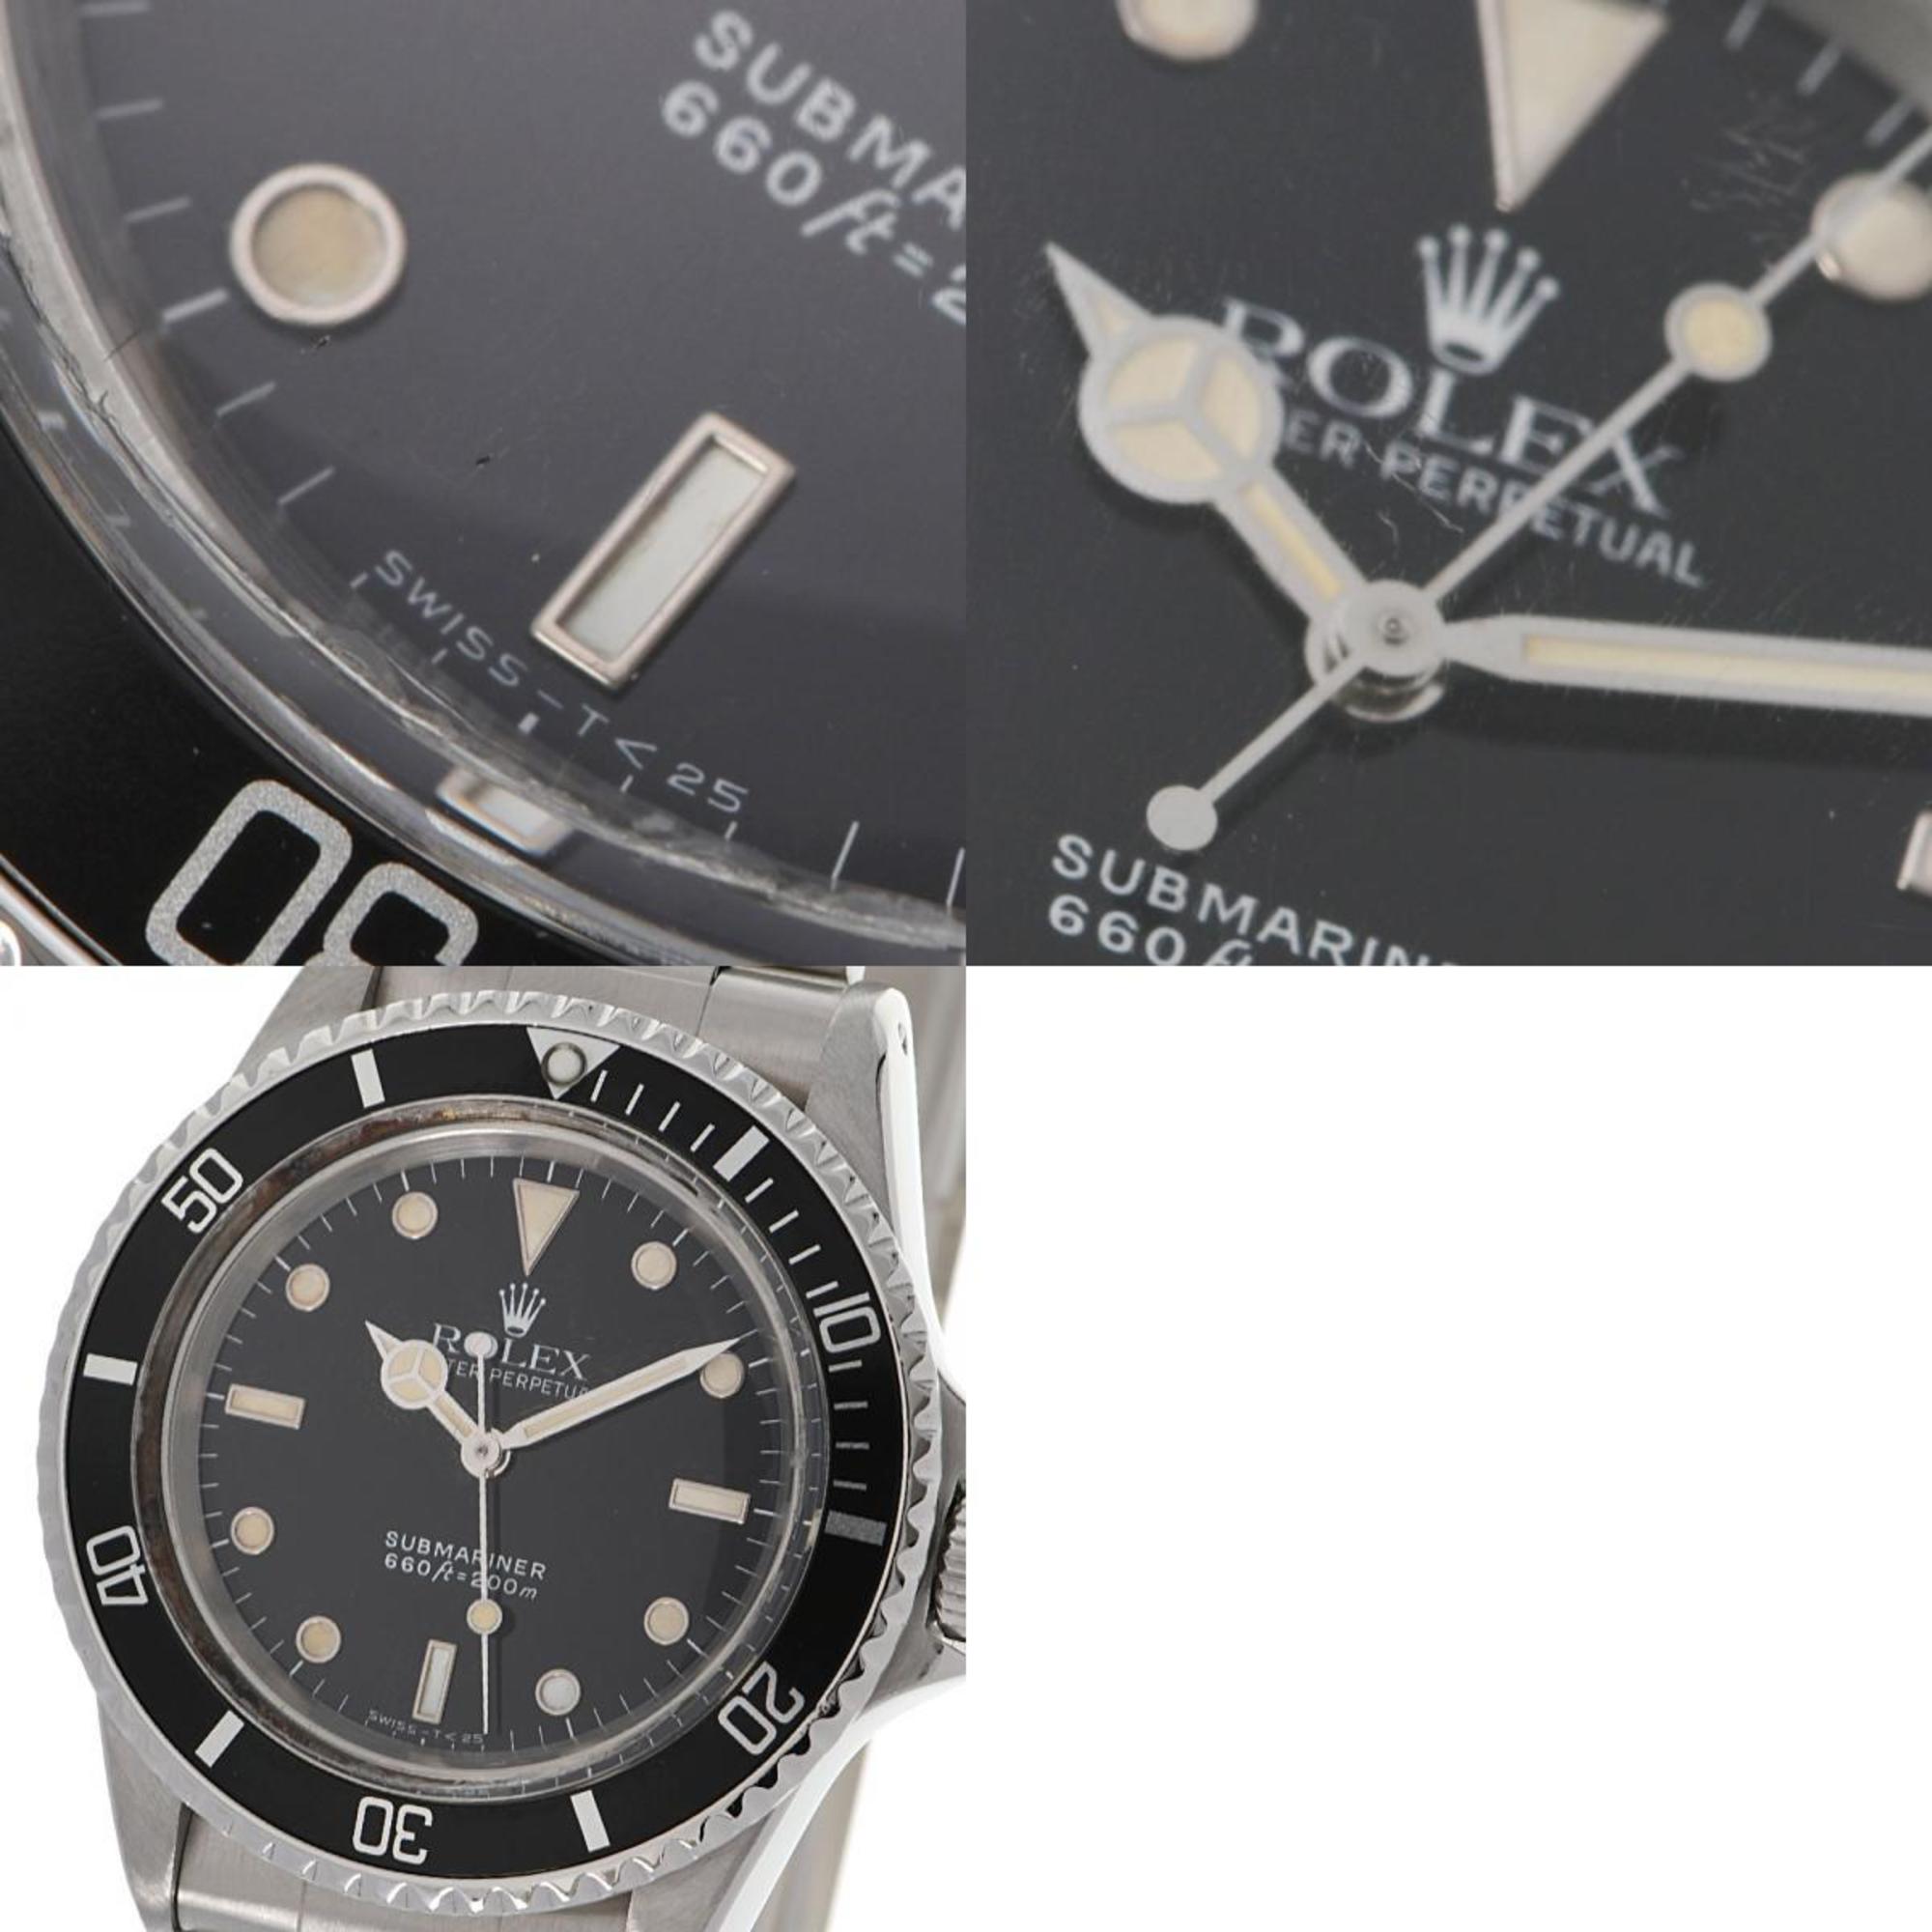 ROLEX Rolex Submariner 5513 men's SS watch automatic winding black dial